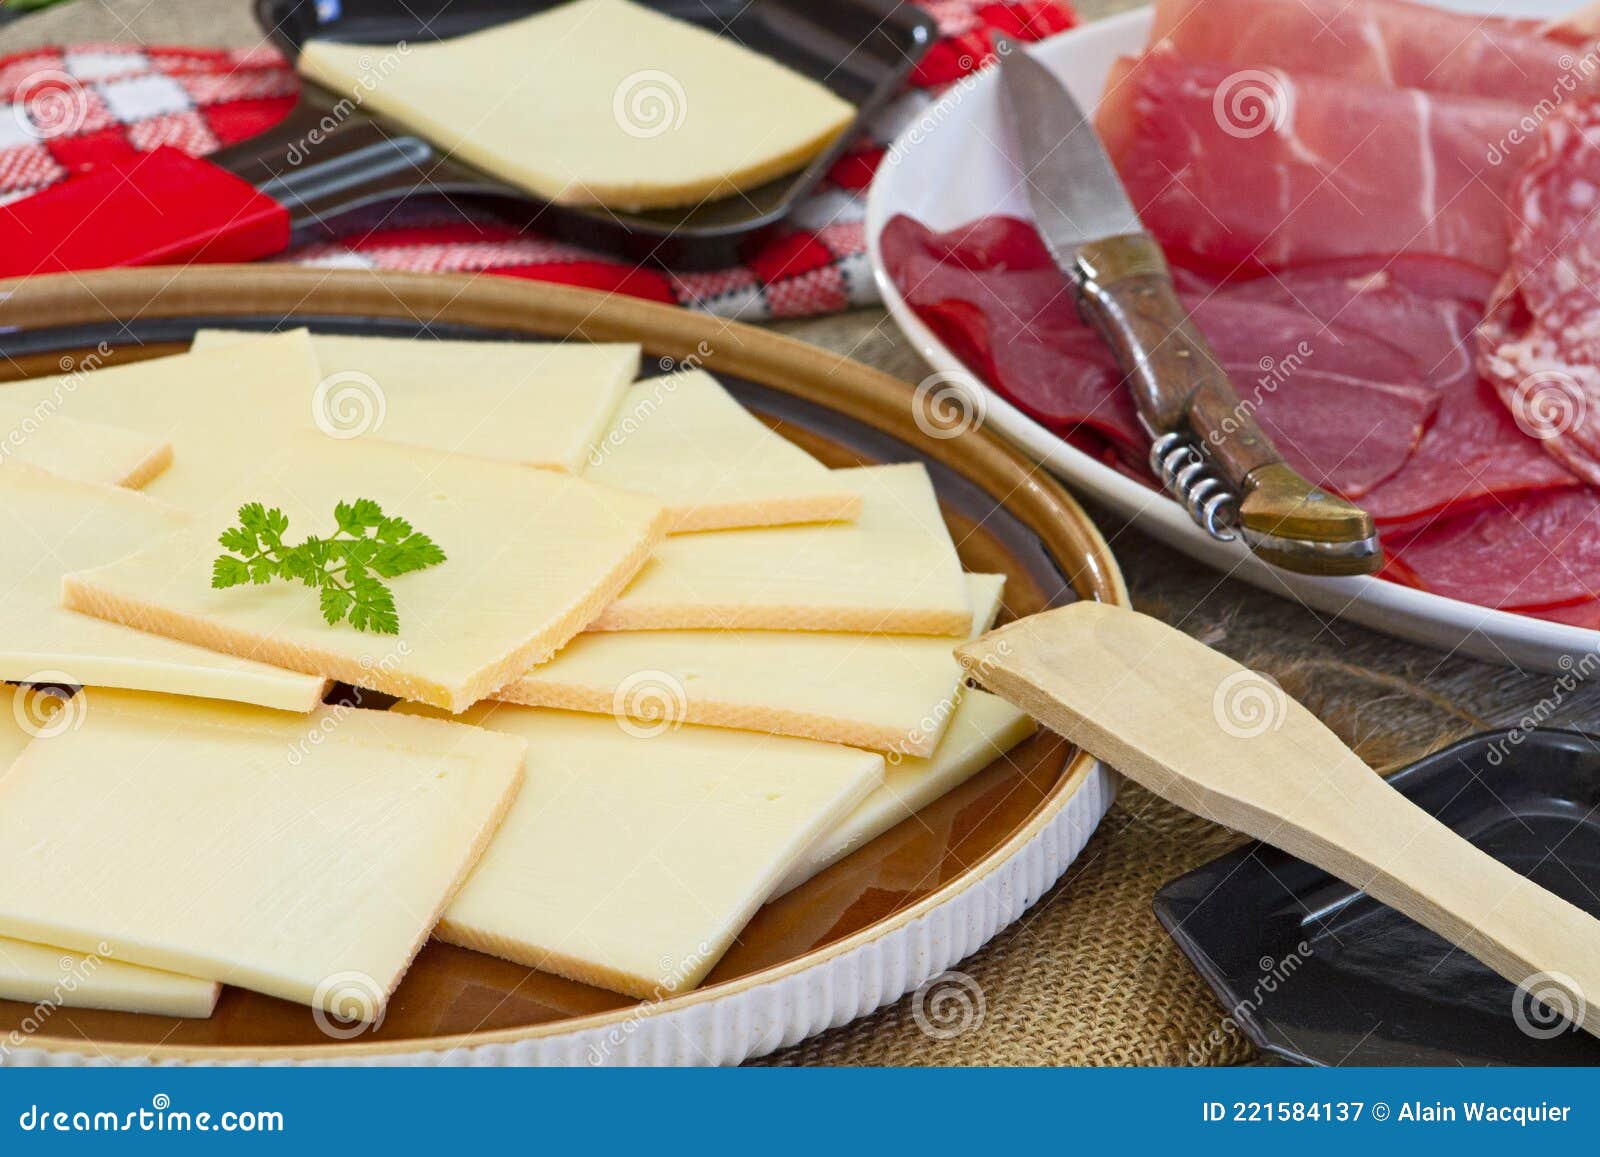 Raclette Cheese And Cold Cuts Stock Image Image Of Dish Meat